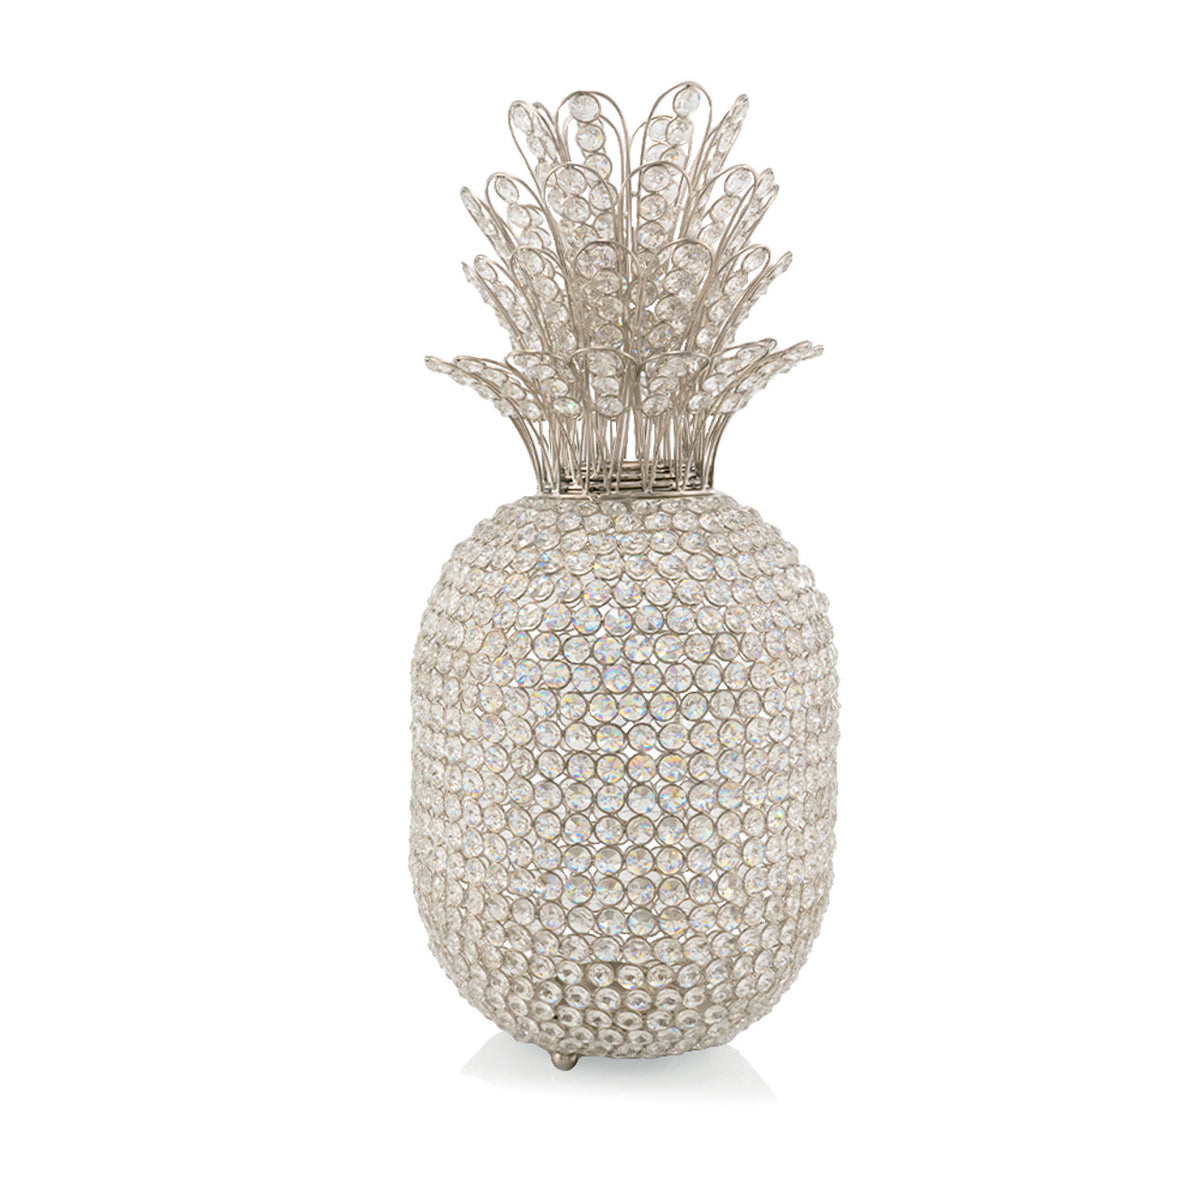 Pina Large Crystal Pineapple Decor, Gold or Silver - Adley & Company Inc. 